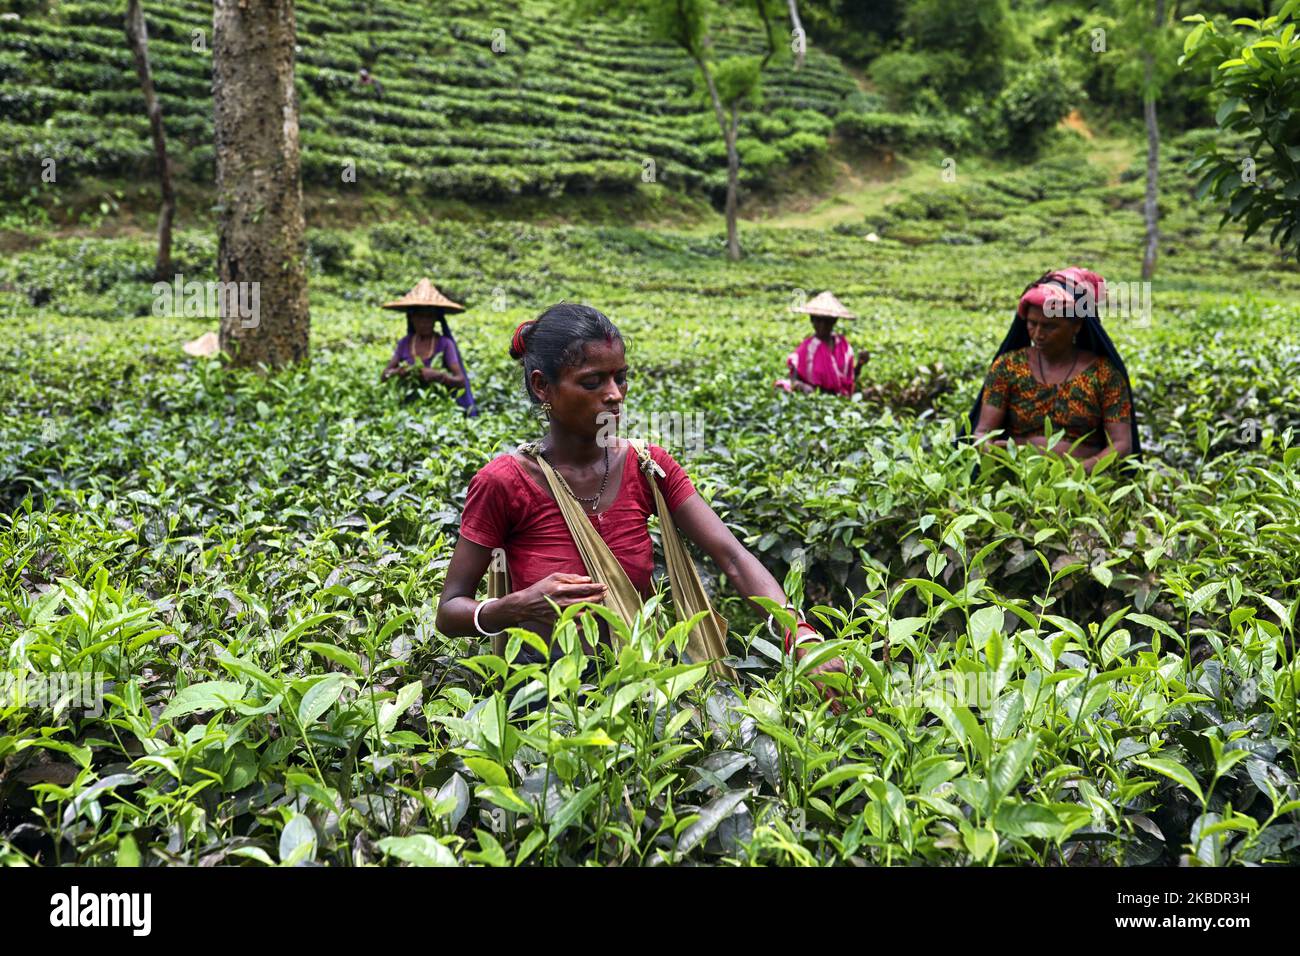 Woman plucking tea leaves from a tea garden at Sylhet Bangladesh on May 26, 2019. Tea Plucking is a specialized skill. Two leaves and a bud need to be plucked in order to get the best taste and profitability. The calculation of daily wage is 75tk(1$) for plucking at least 22-23 kg leaves per day for a worker. The area of Sylhet has over 150 gardens including three of the largest tea gardens in the world both in area and production. Nearly 300,000 workers are employed on the tea estates of which over 75% are women but they are passing their lives as a slave. (Photo by Kazi Salahuddin Razu/NurPh Stock Photo